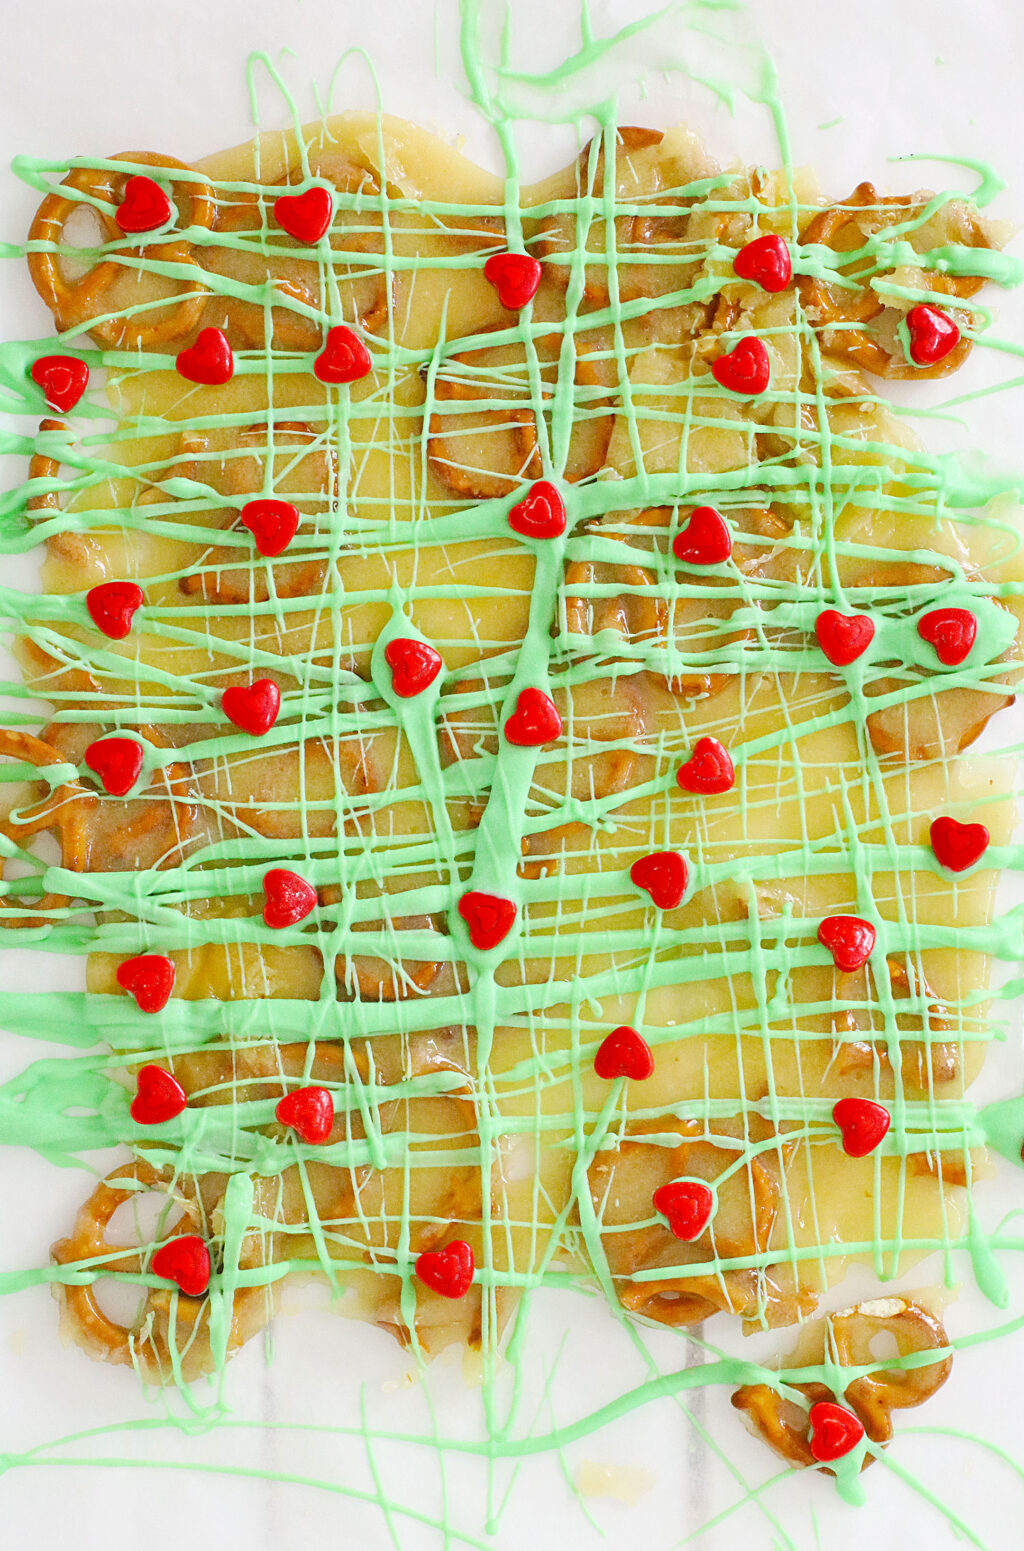 melted green chocolate drizzled over brittle on white table